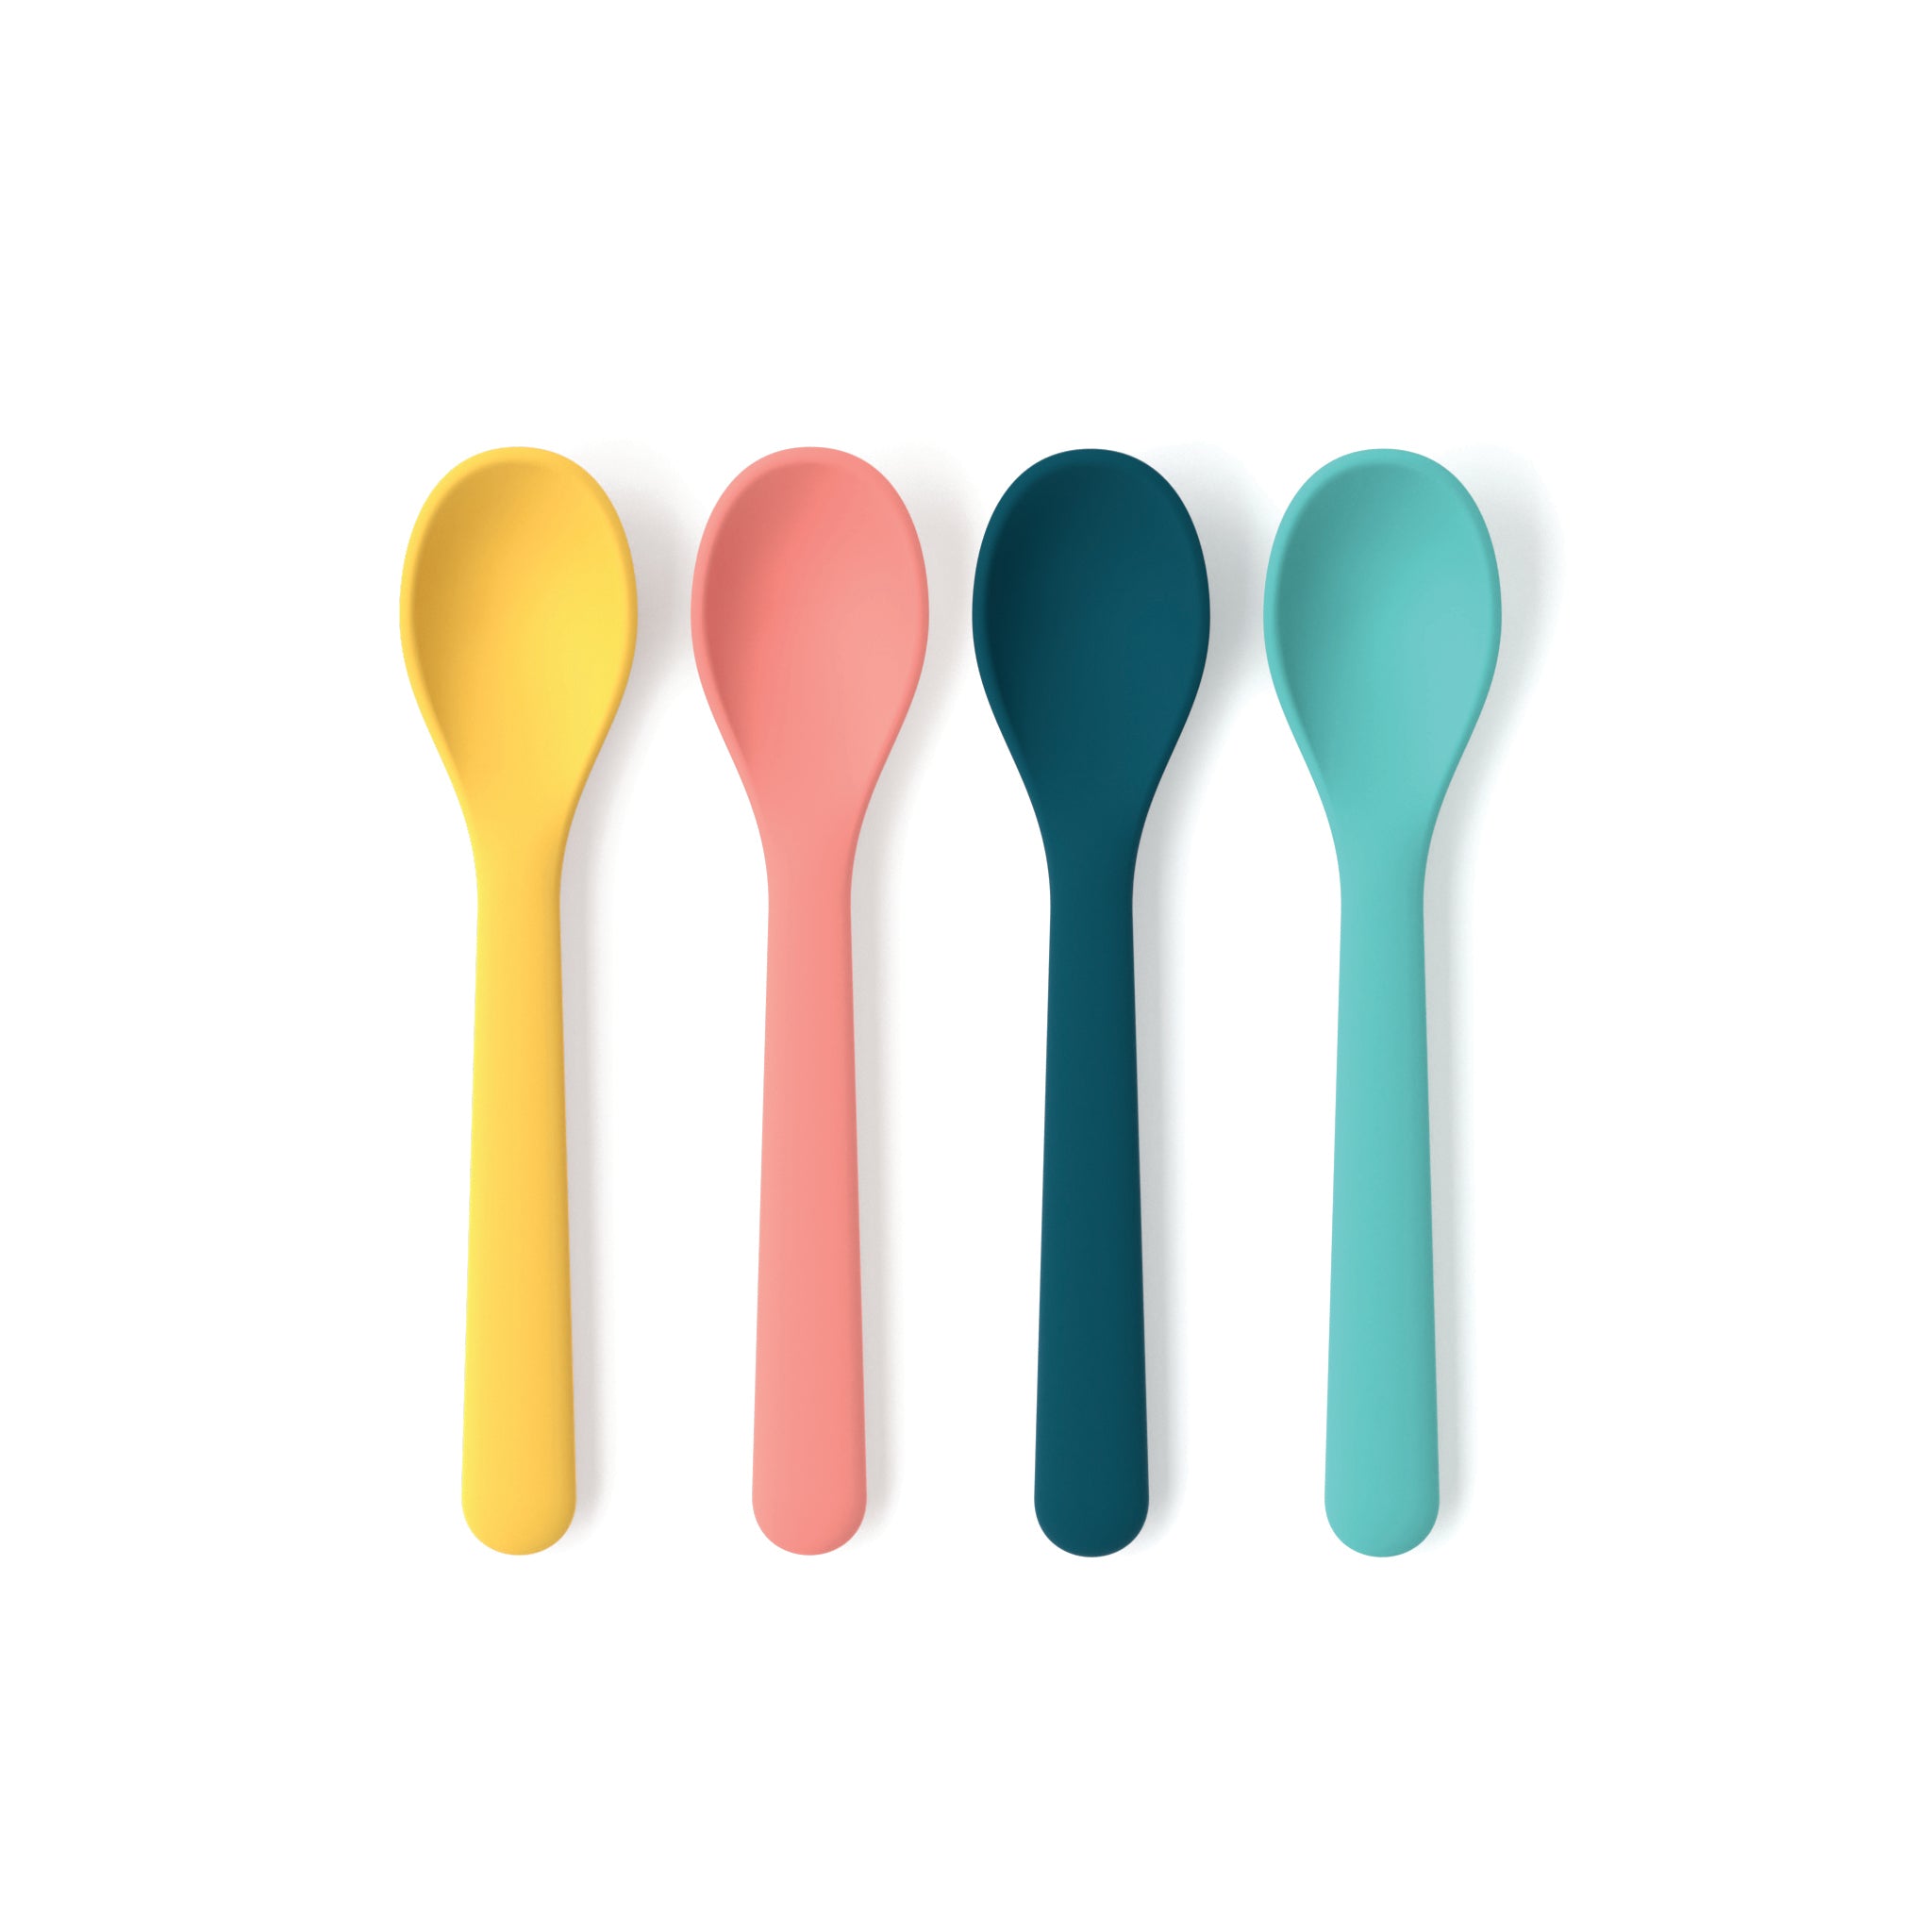 Ekobo Recycled Bamboo Measuring Cup and Spoon Set on Food52